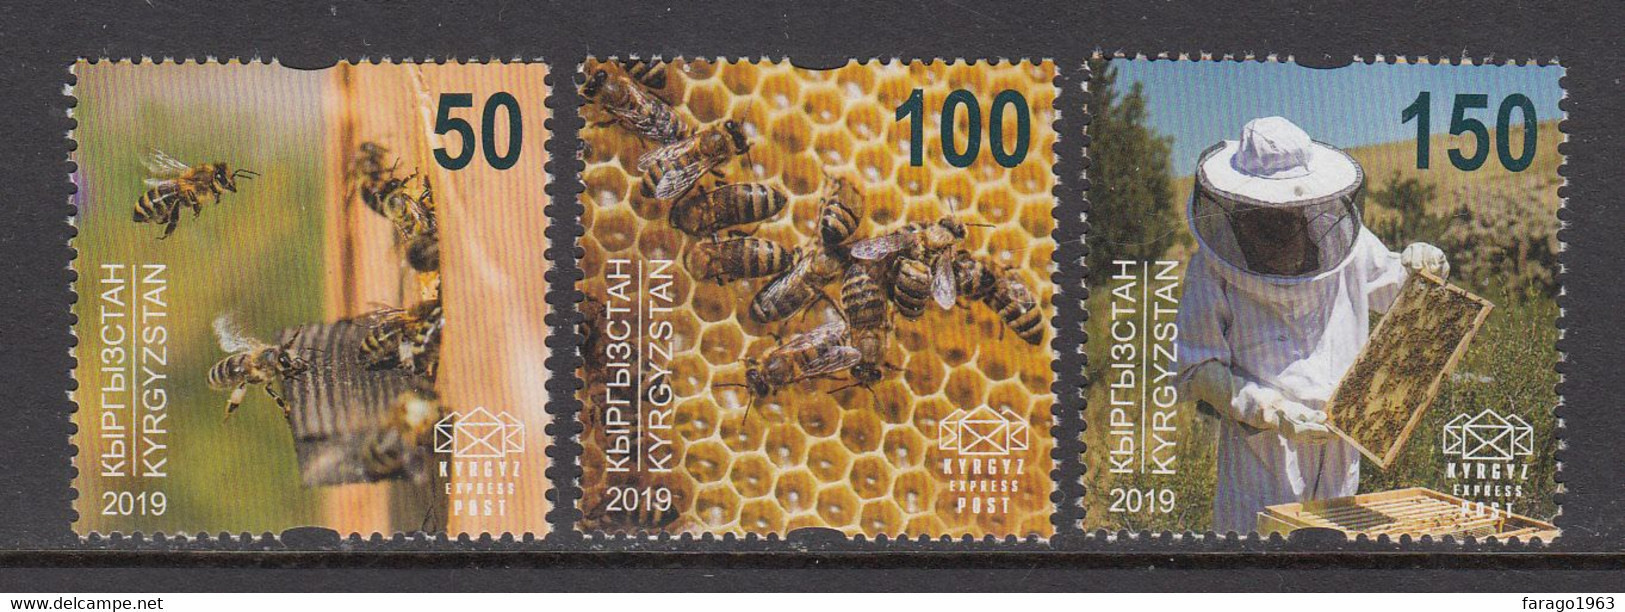 2019 Kyrgyzstan Bees Honey  Complete Set Of 3  MNH - Kirghizstan